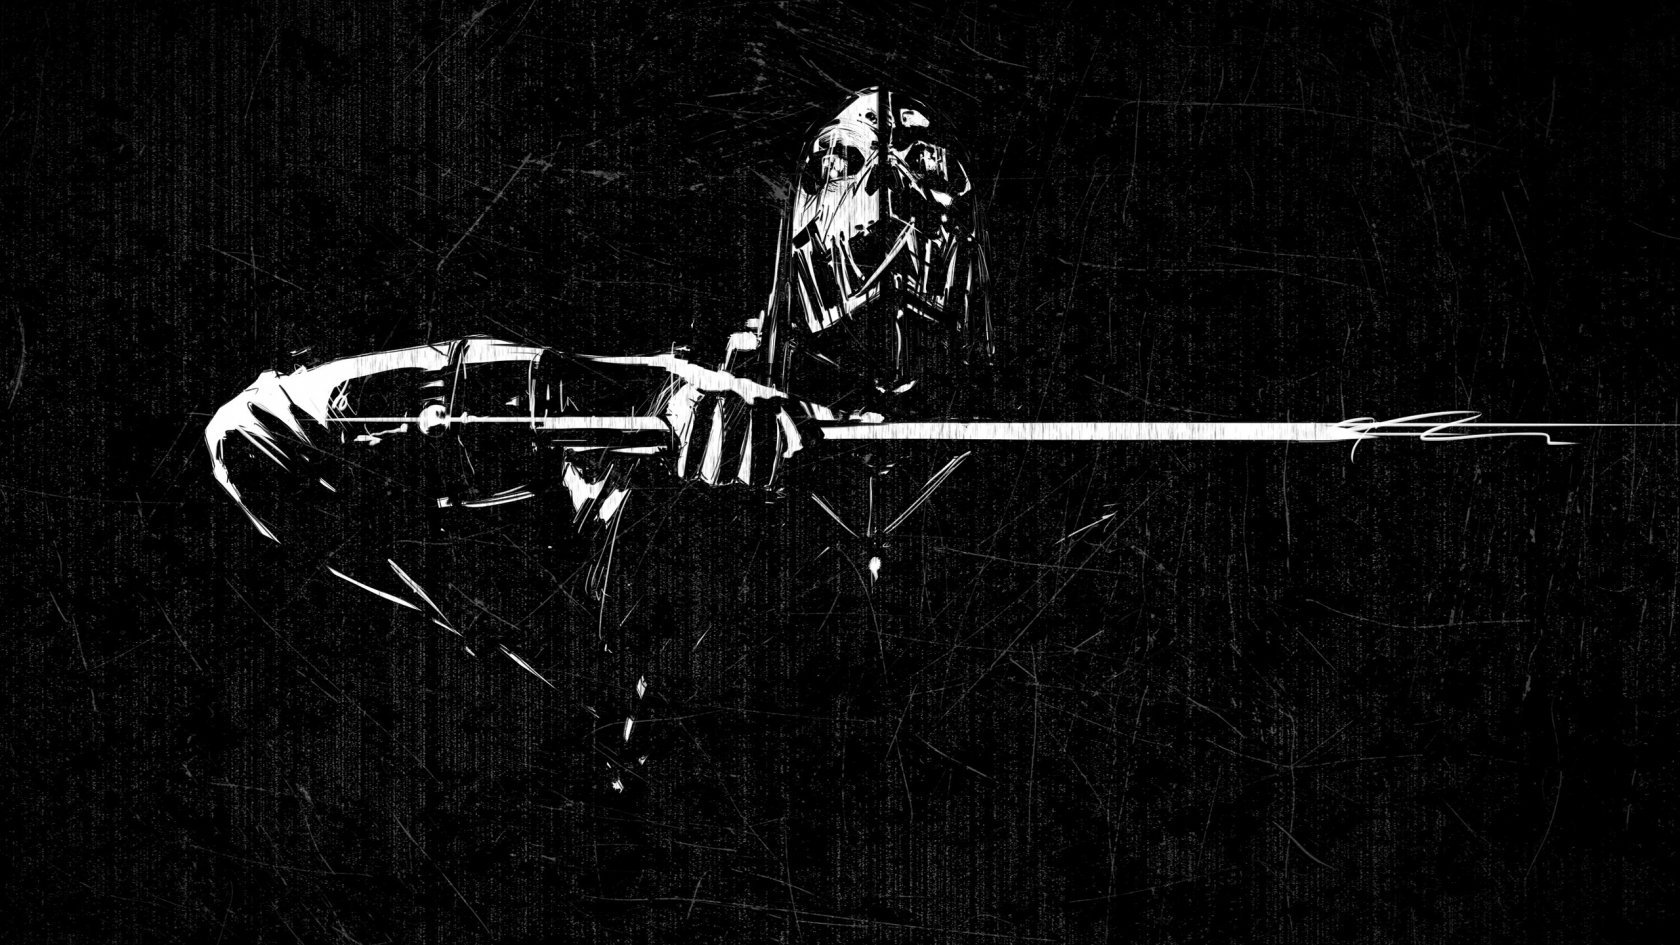 Dishonored Scraped Minimal for 1680 x 945 HDTV resolution